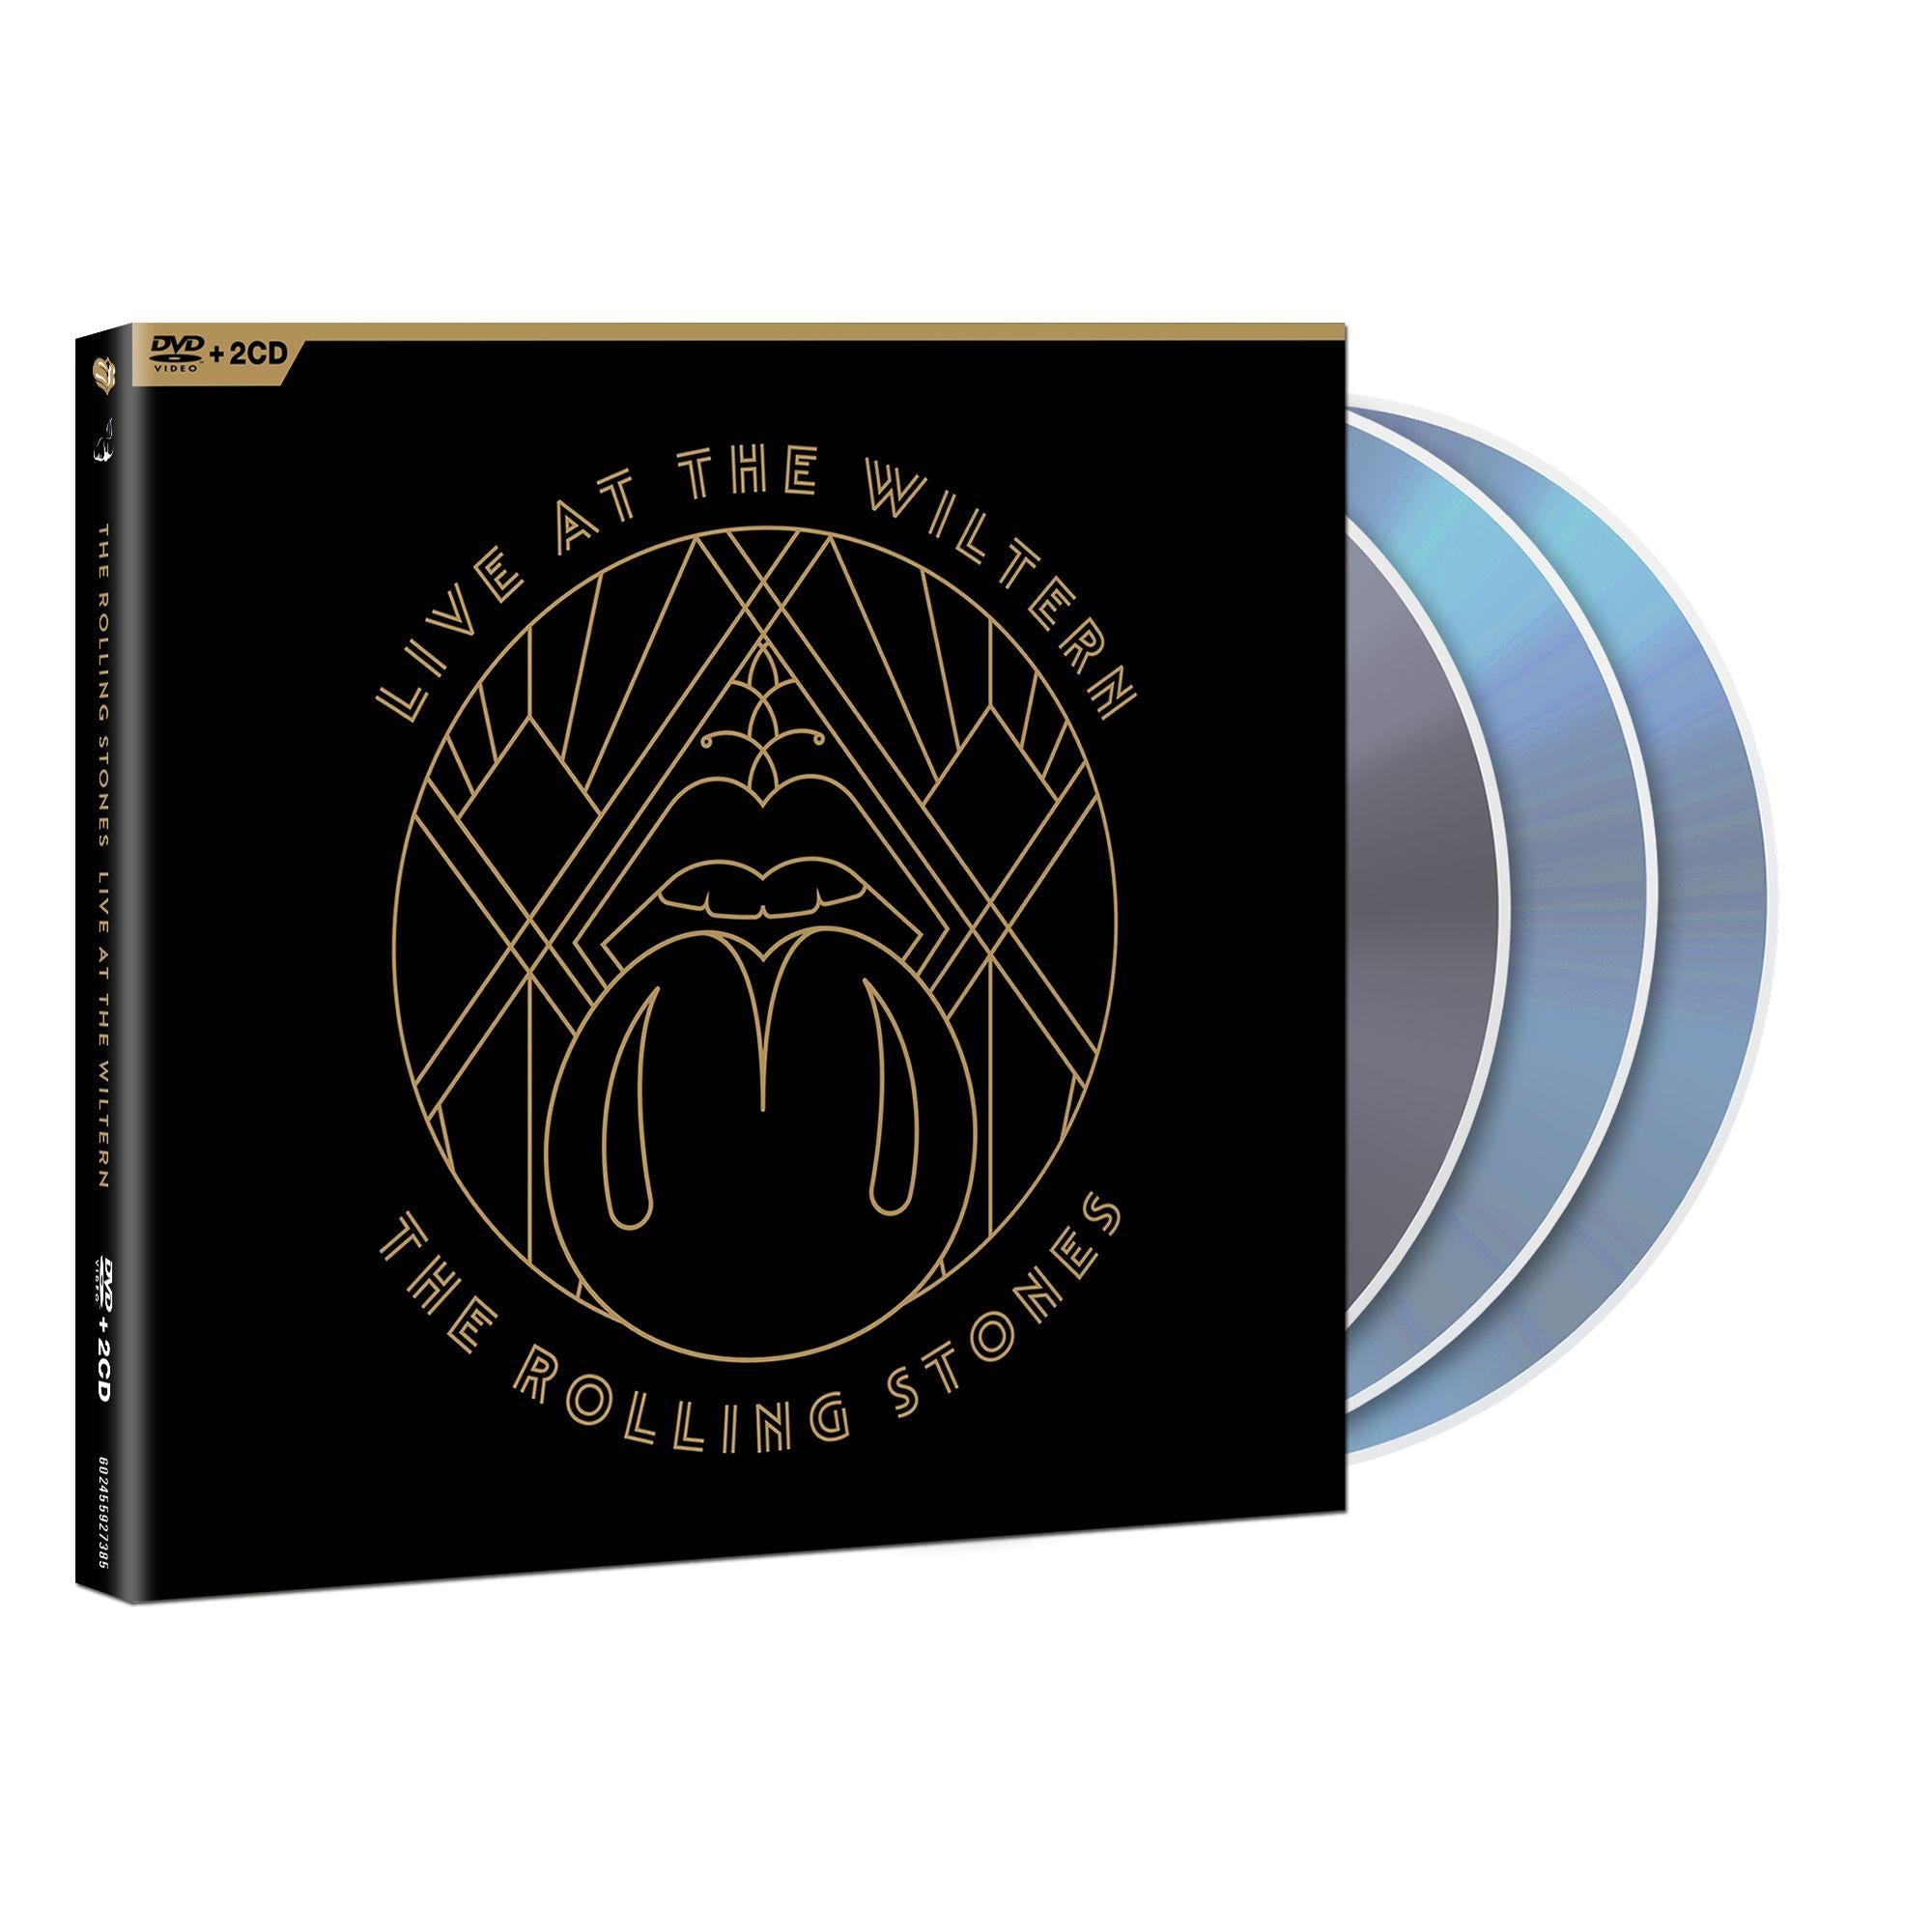 Live At the Wiltern Theater (November 5, 2009) - Album by The